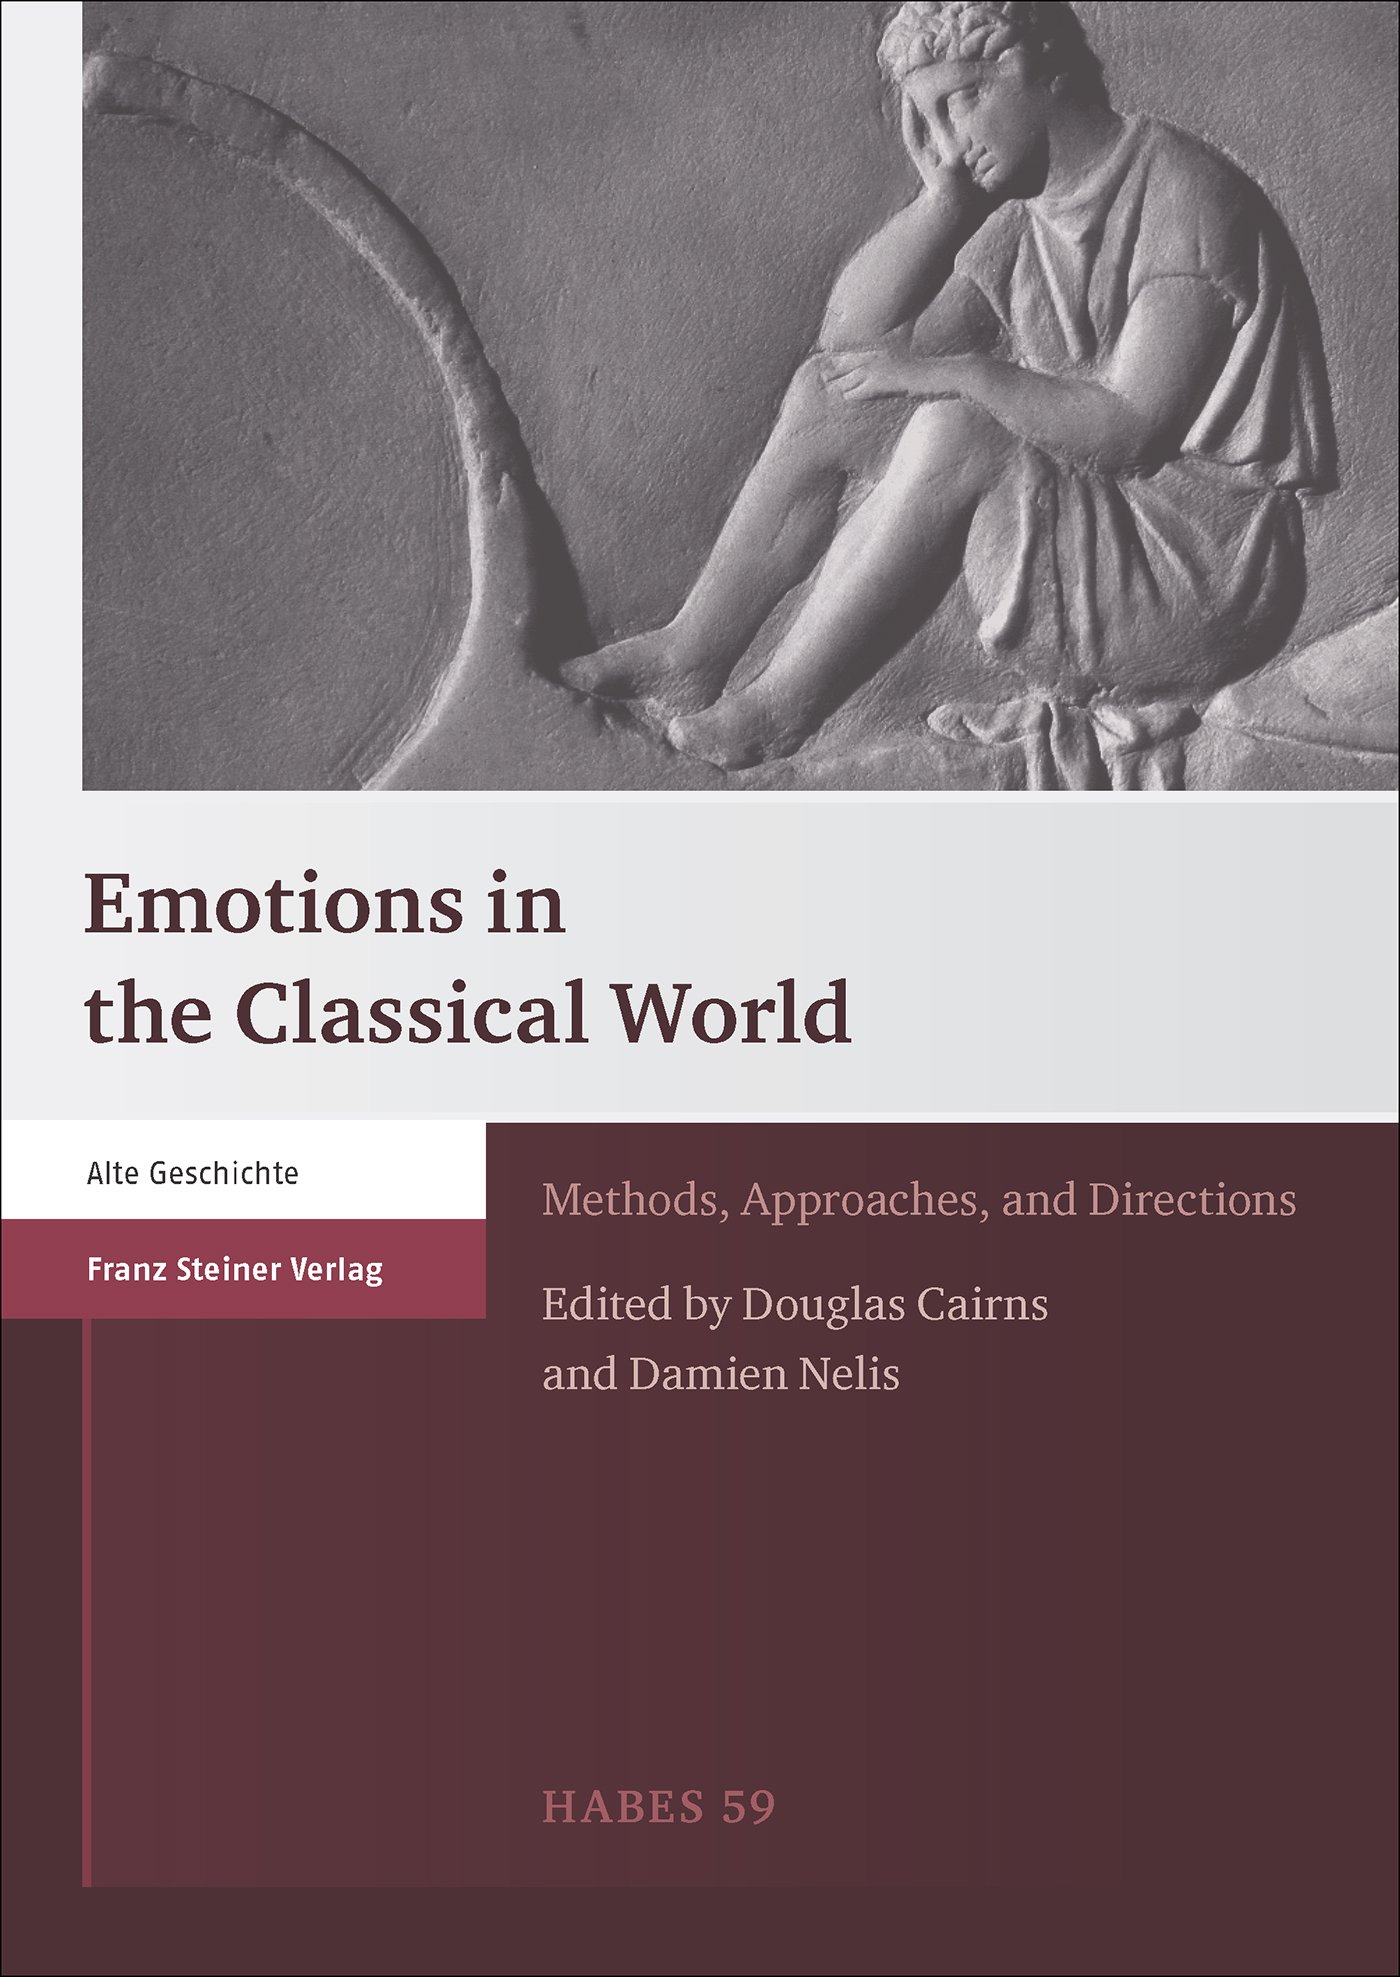 Emotions in the Classical World